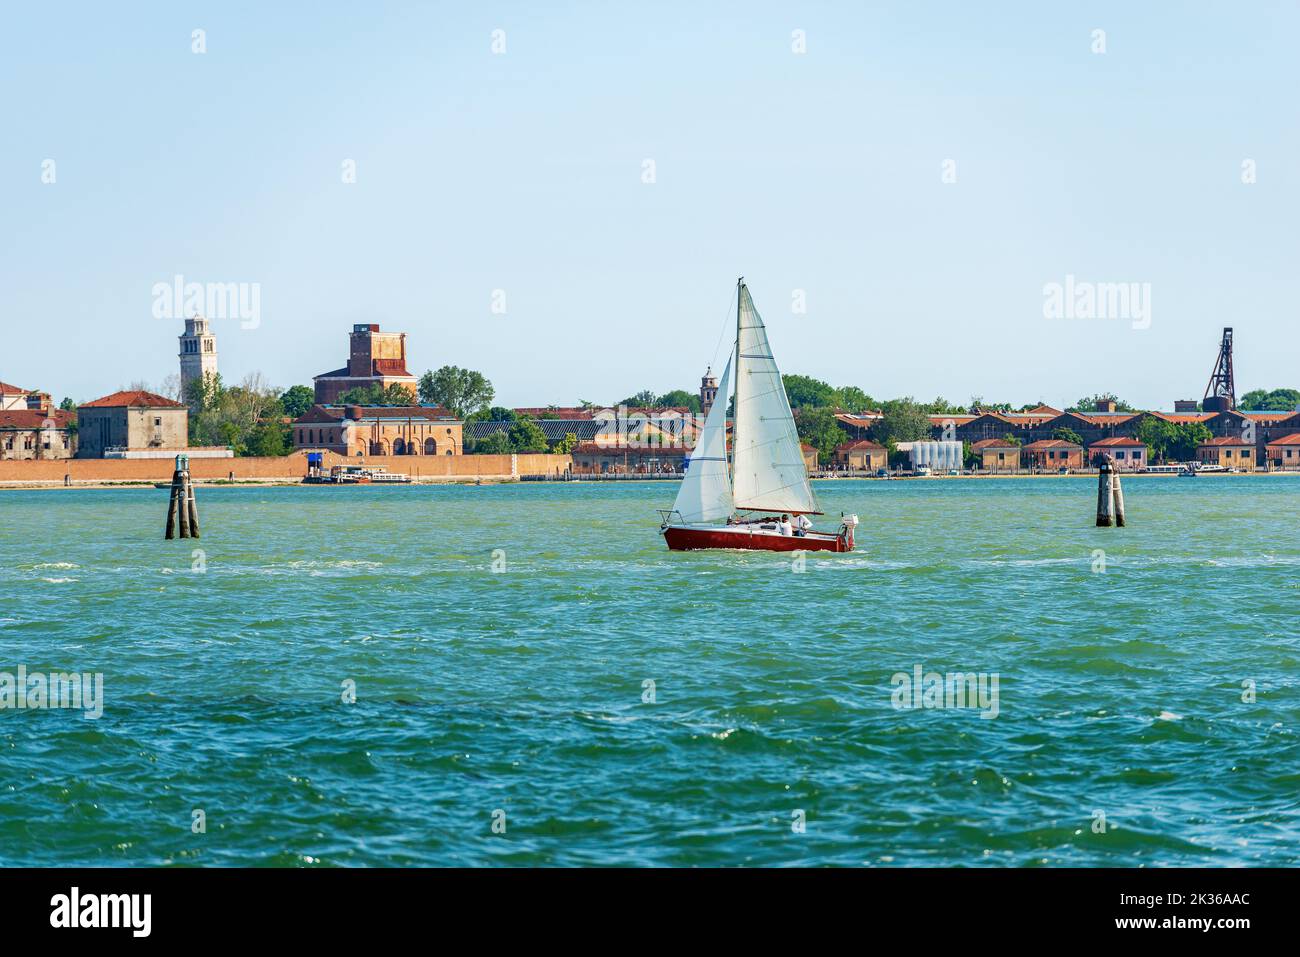 White and red sailing boat in motion in the Venetian Lagoon on a sunny spring day. Venice, Veneto, Italy, southern Europe. UNESCO world heritage site. Stock Photo